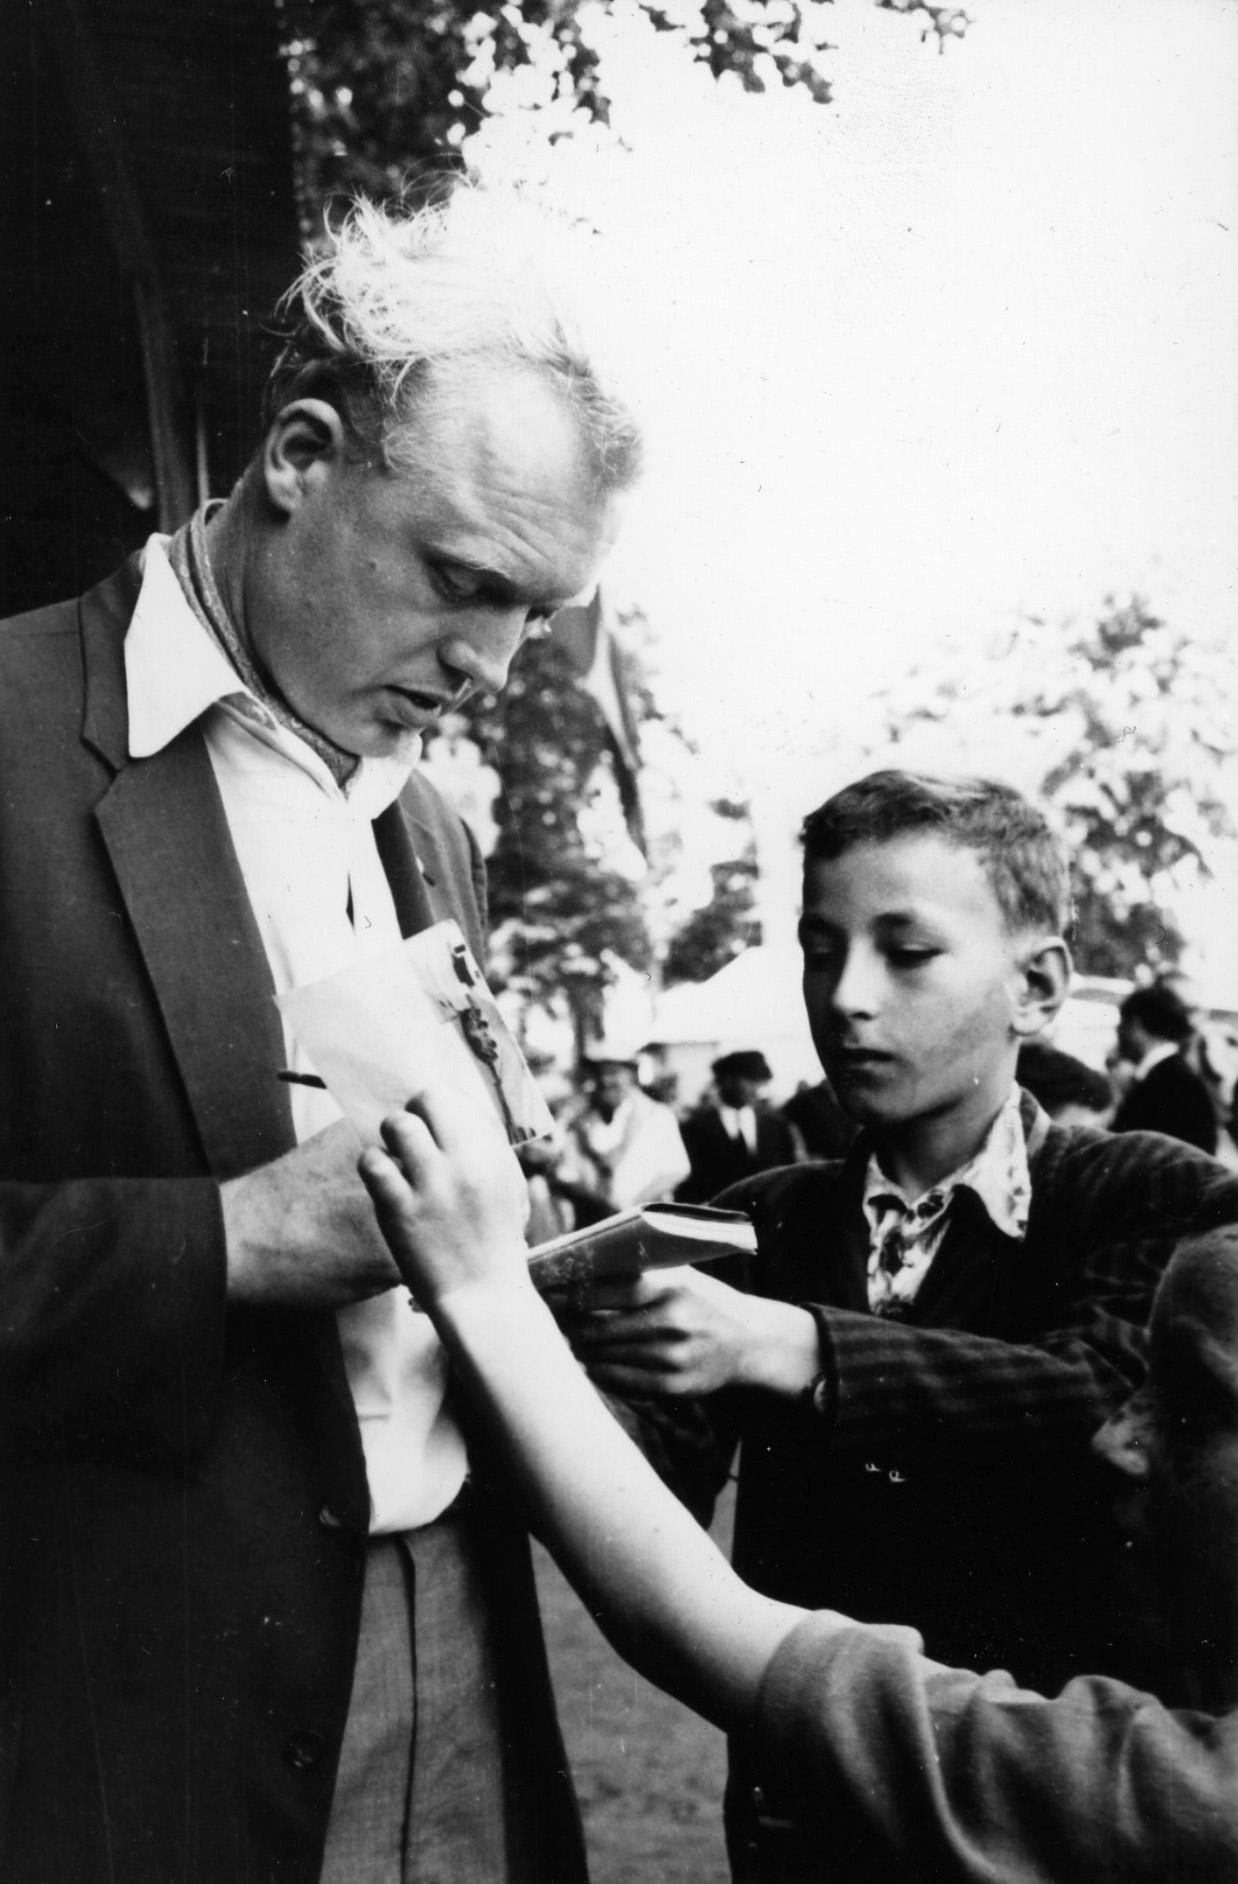 Mike Hawthorn was recognised for his speed, but also for his attire: here in a green jacket, white shirt and bow tie signing autographs at the 1955 24 Hours of Le Mans.